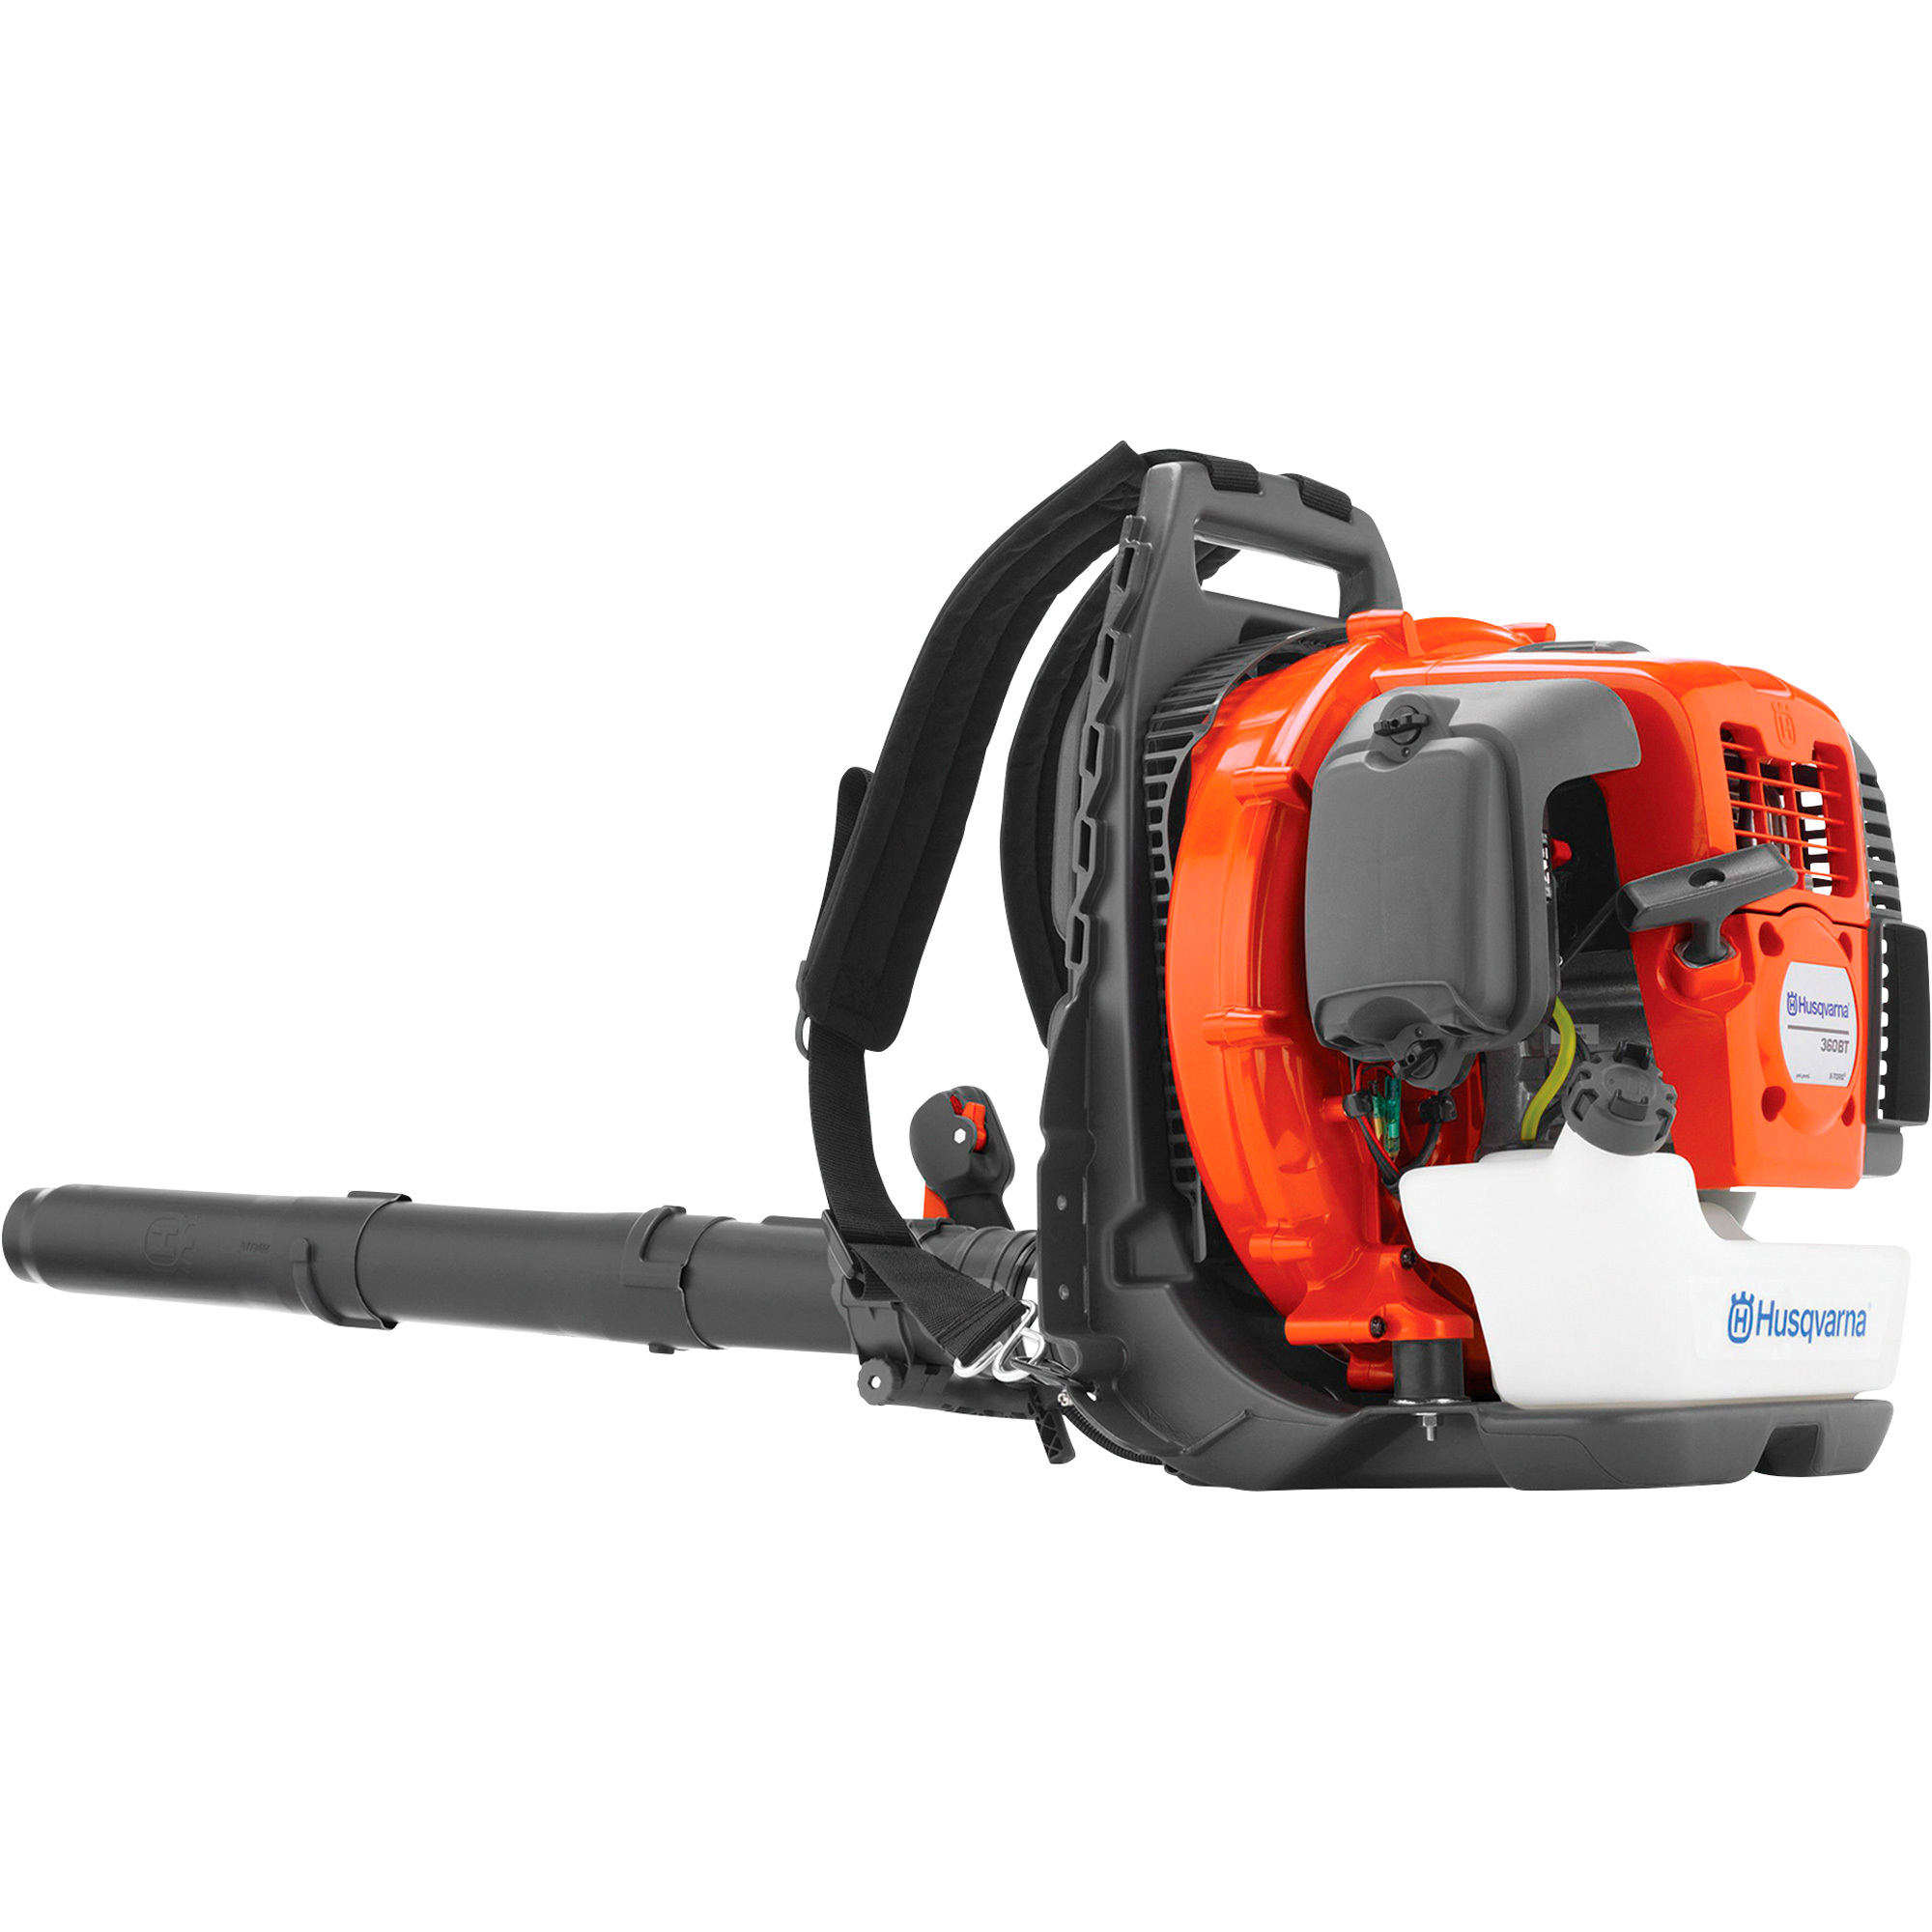 Husqvarna Reconditioned Backpack Blower â 65.2cc, 632 CFM, Model 360BT Recon